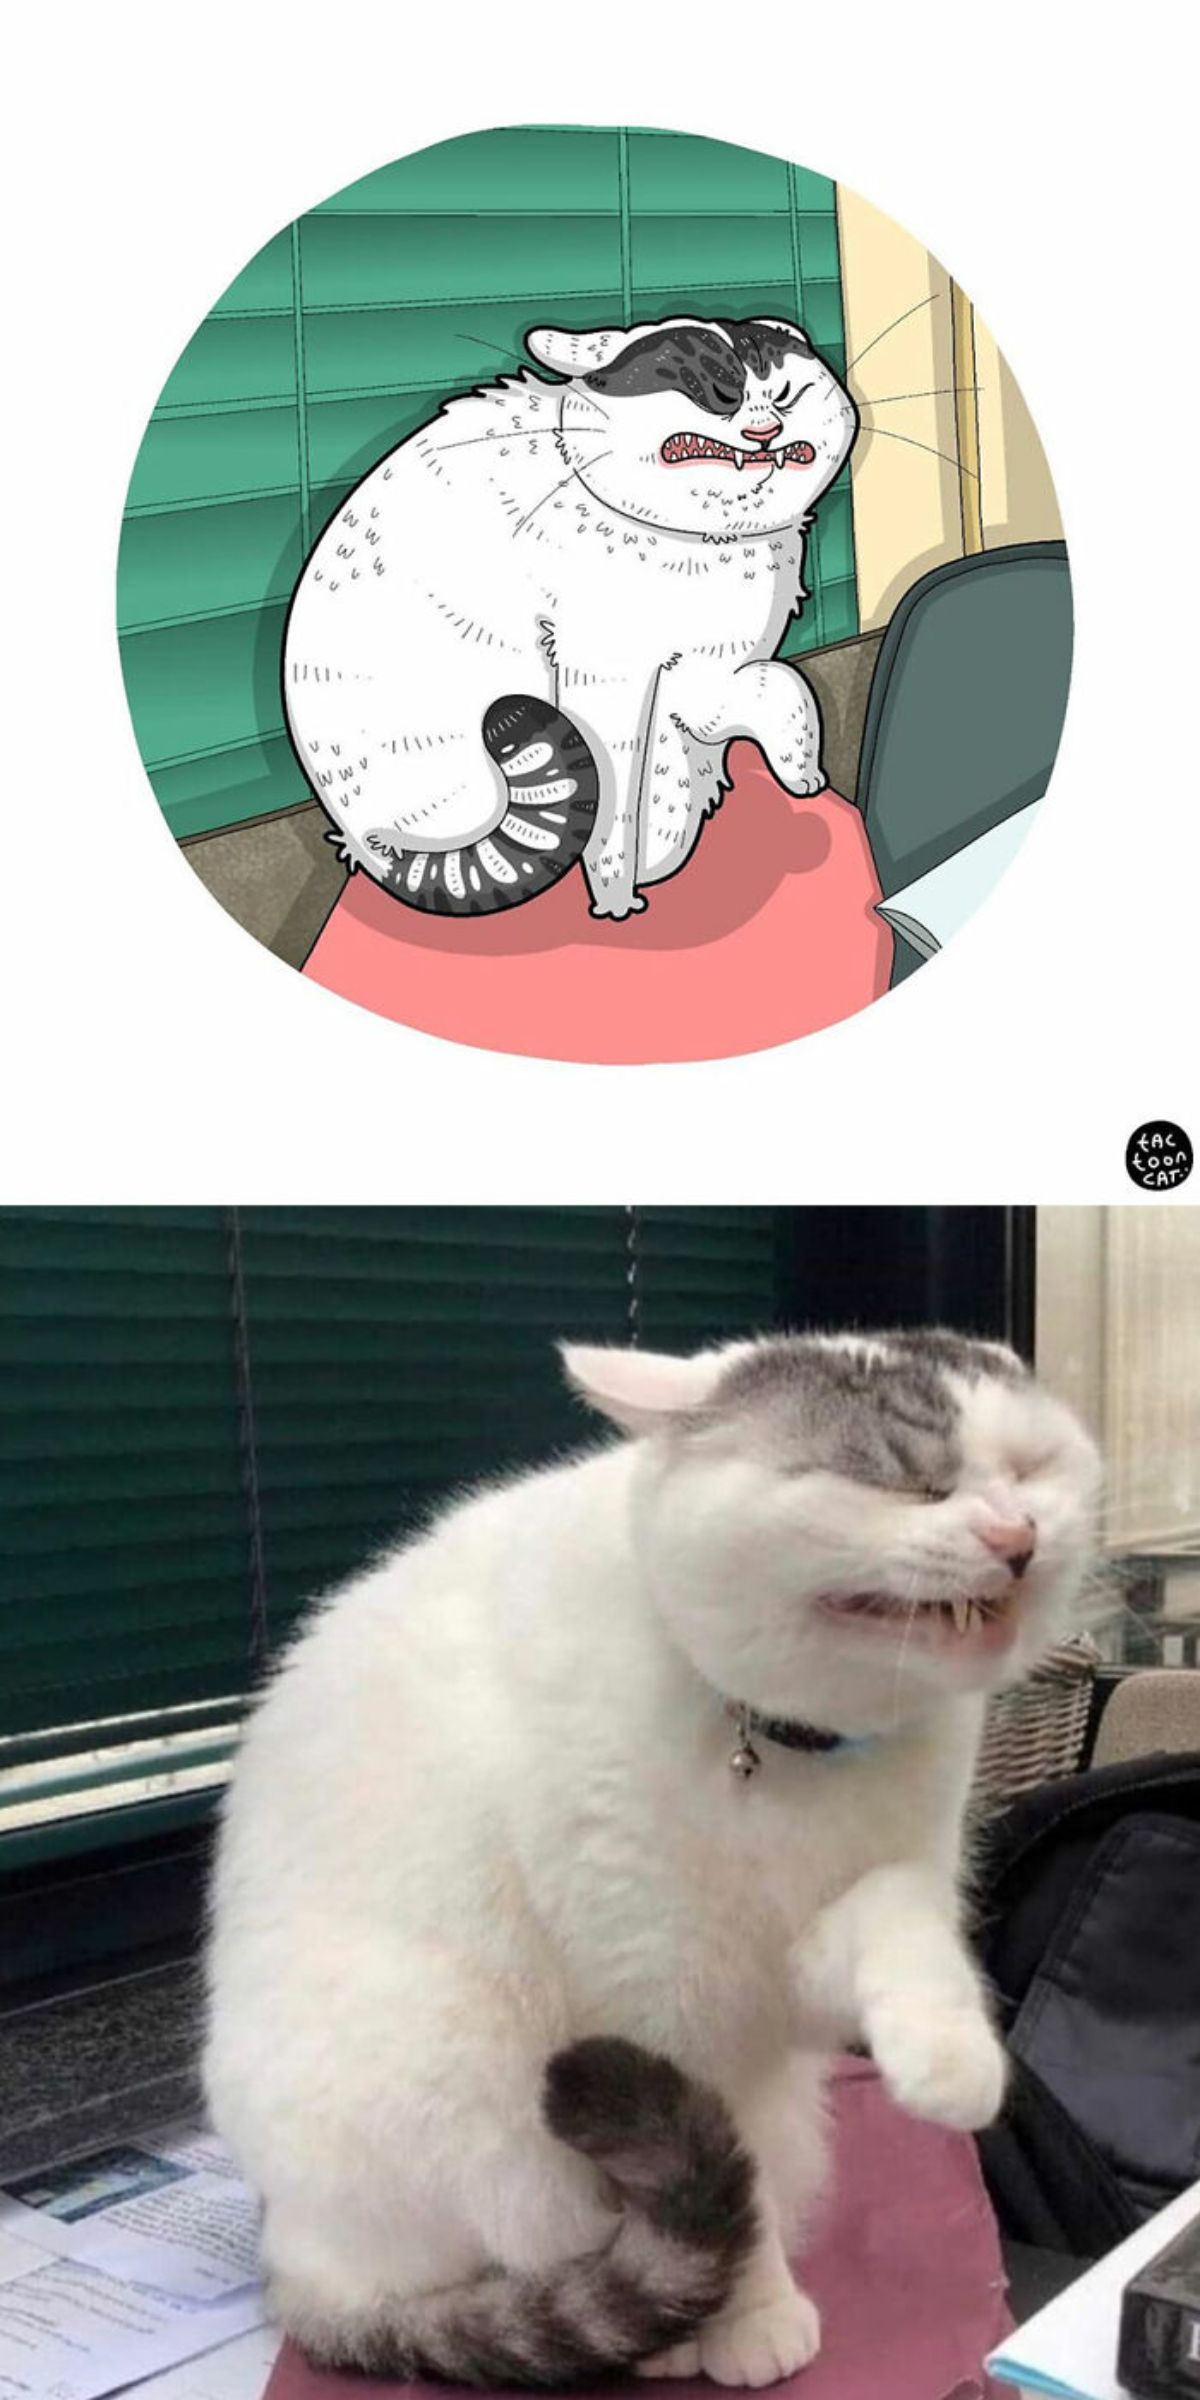 cartoon photo and real photo of a grey and white tabby cat sitting looking like it's sneezing with the front left paw in front of the chest